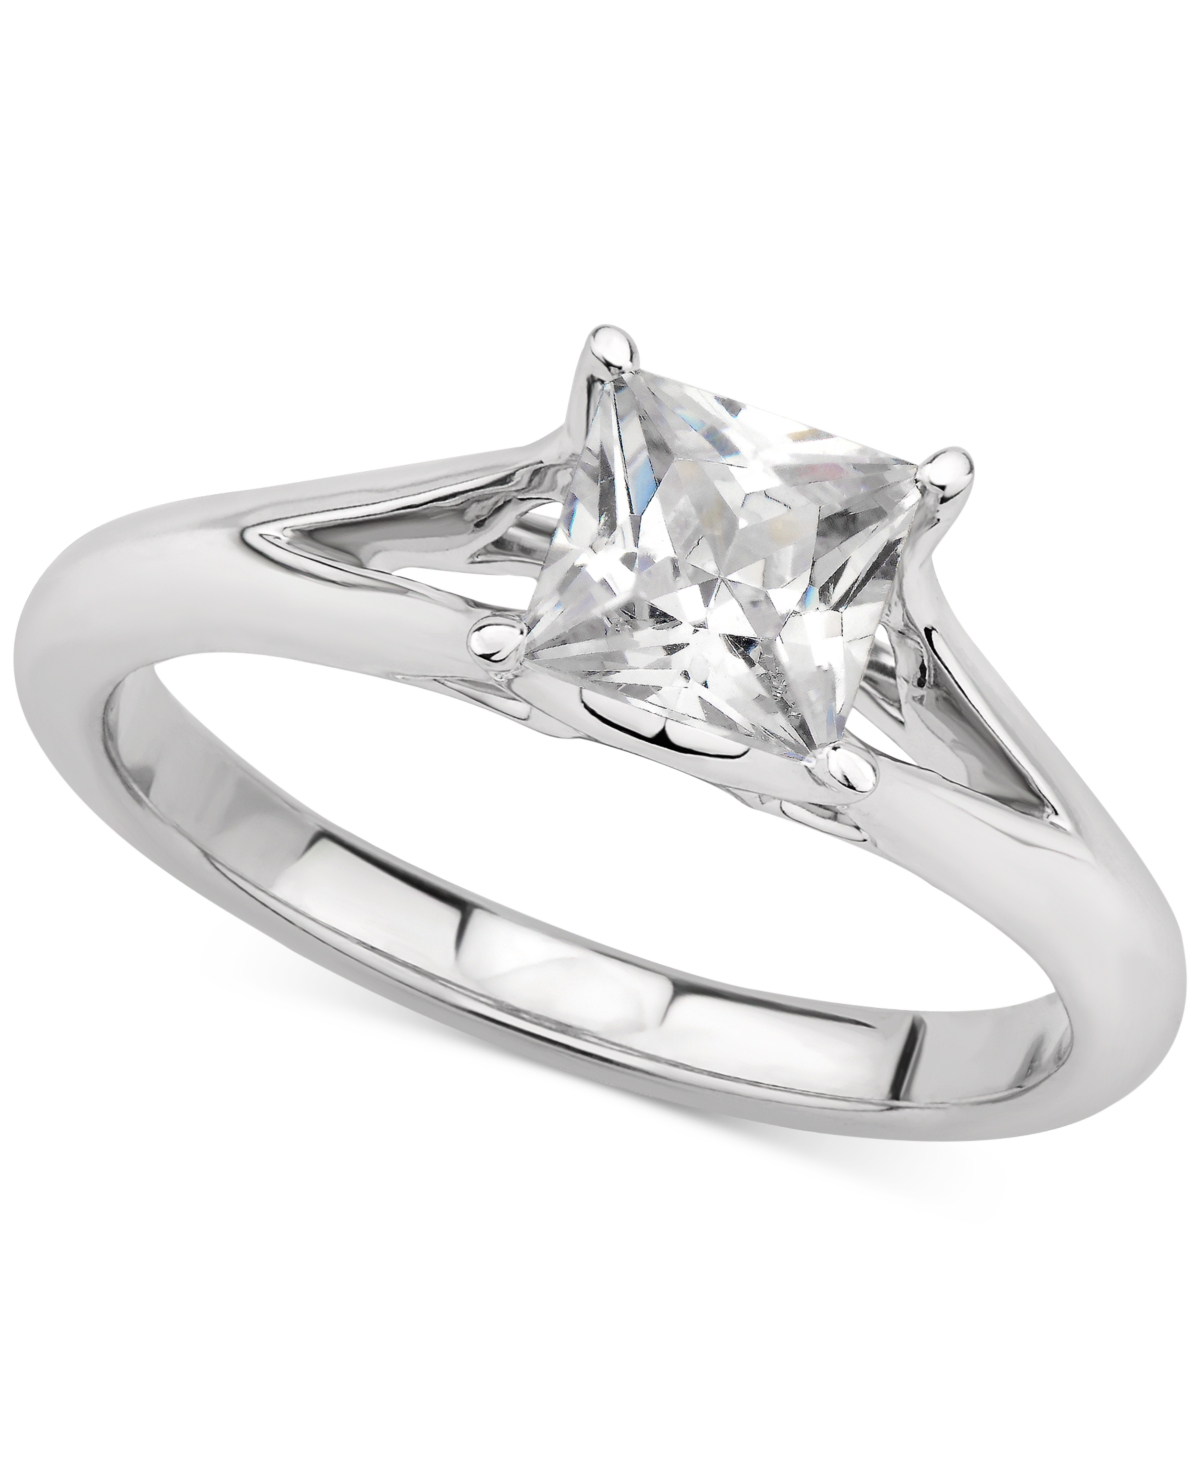 Gia Certified Diamond Princess Solitaire Engagement Ring (1 ct. t.w.) in 14k White Gold - White Gold